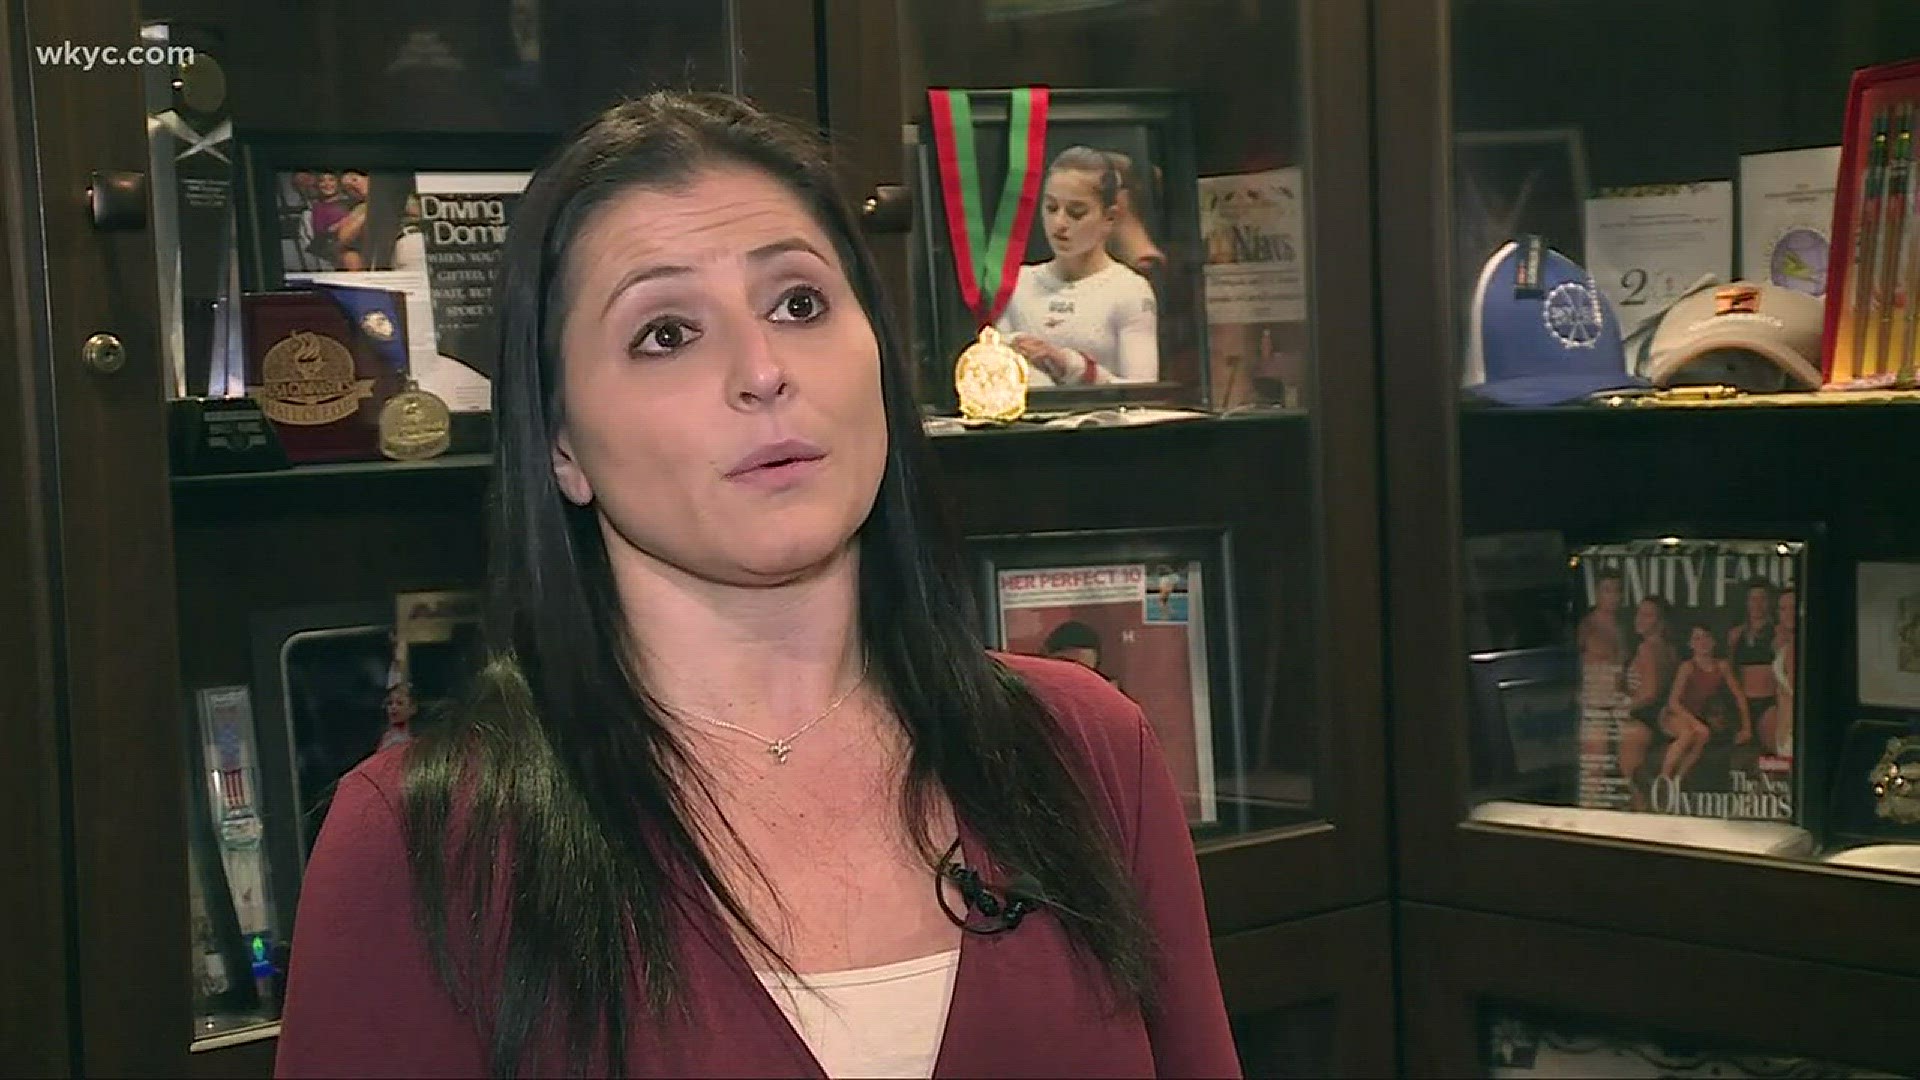 EXCLUSIVE Dominique Moceanu speaks out on USA Gymnastics sex scandal wkyc